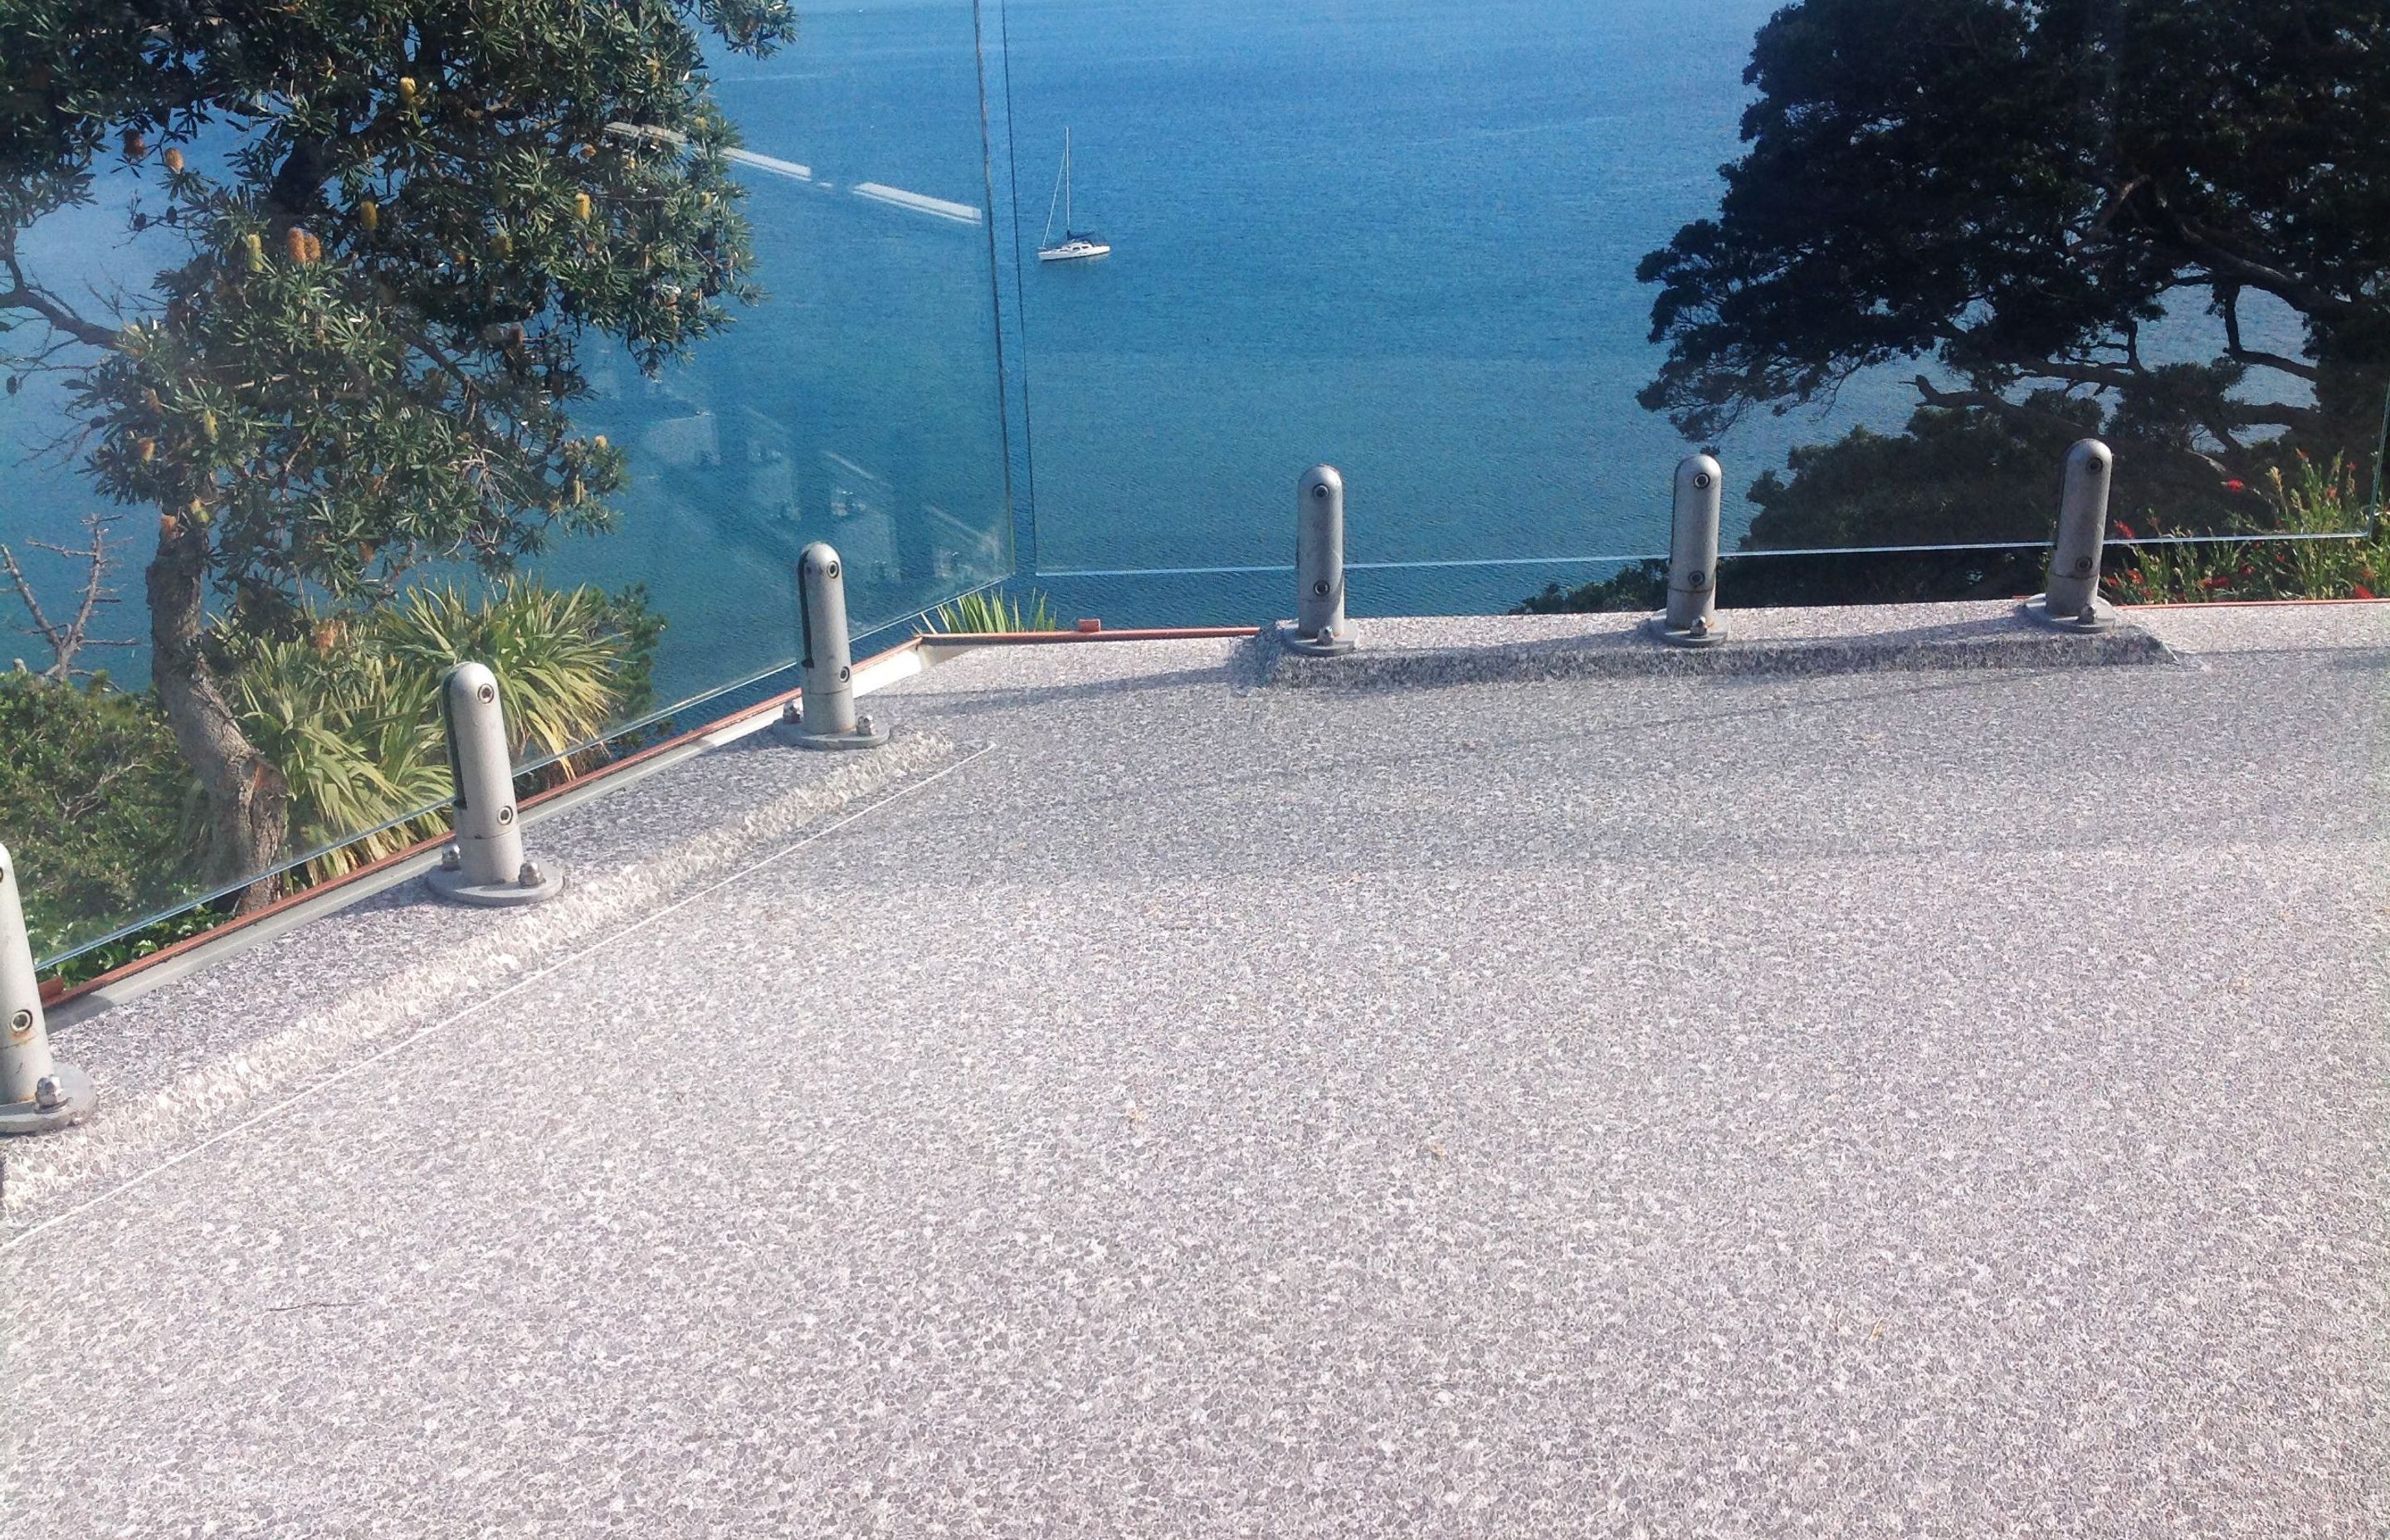 Durable and stylish Viking Dec-K-ing PVC membrane in Sand Pebble